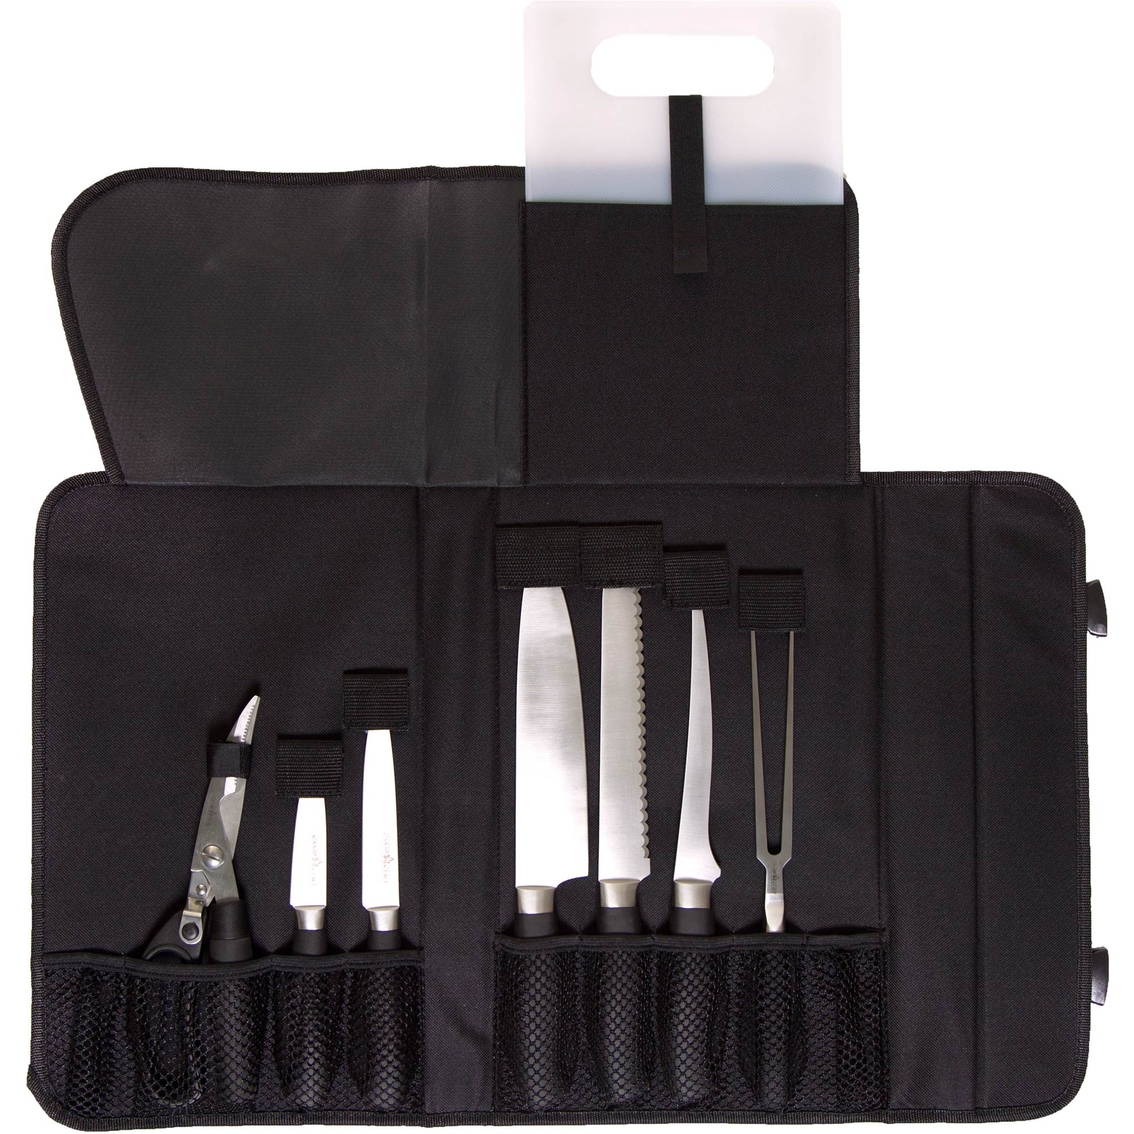 Camp Chef 9 Piece Professional Knife Set - Image 3 of 4